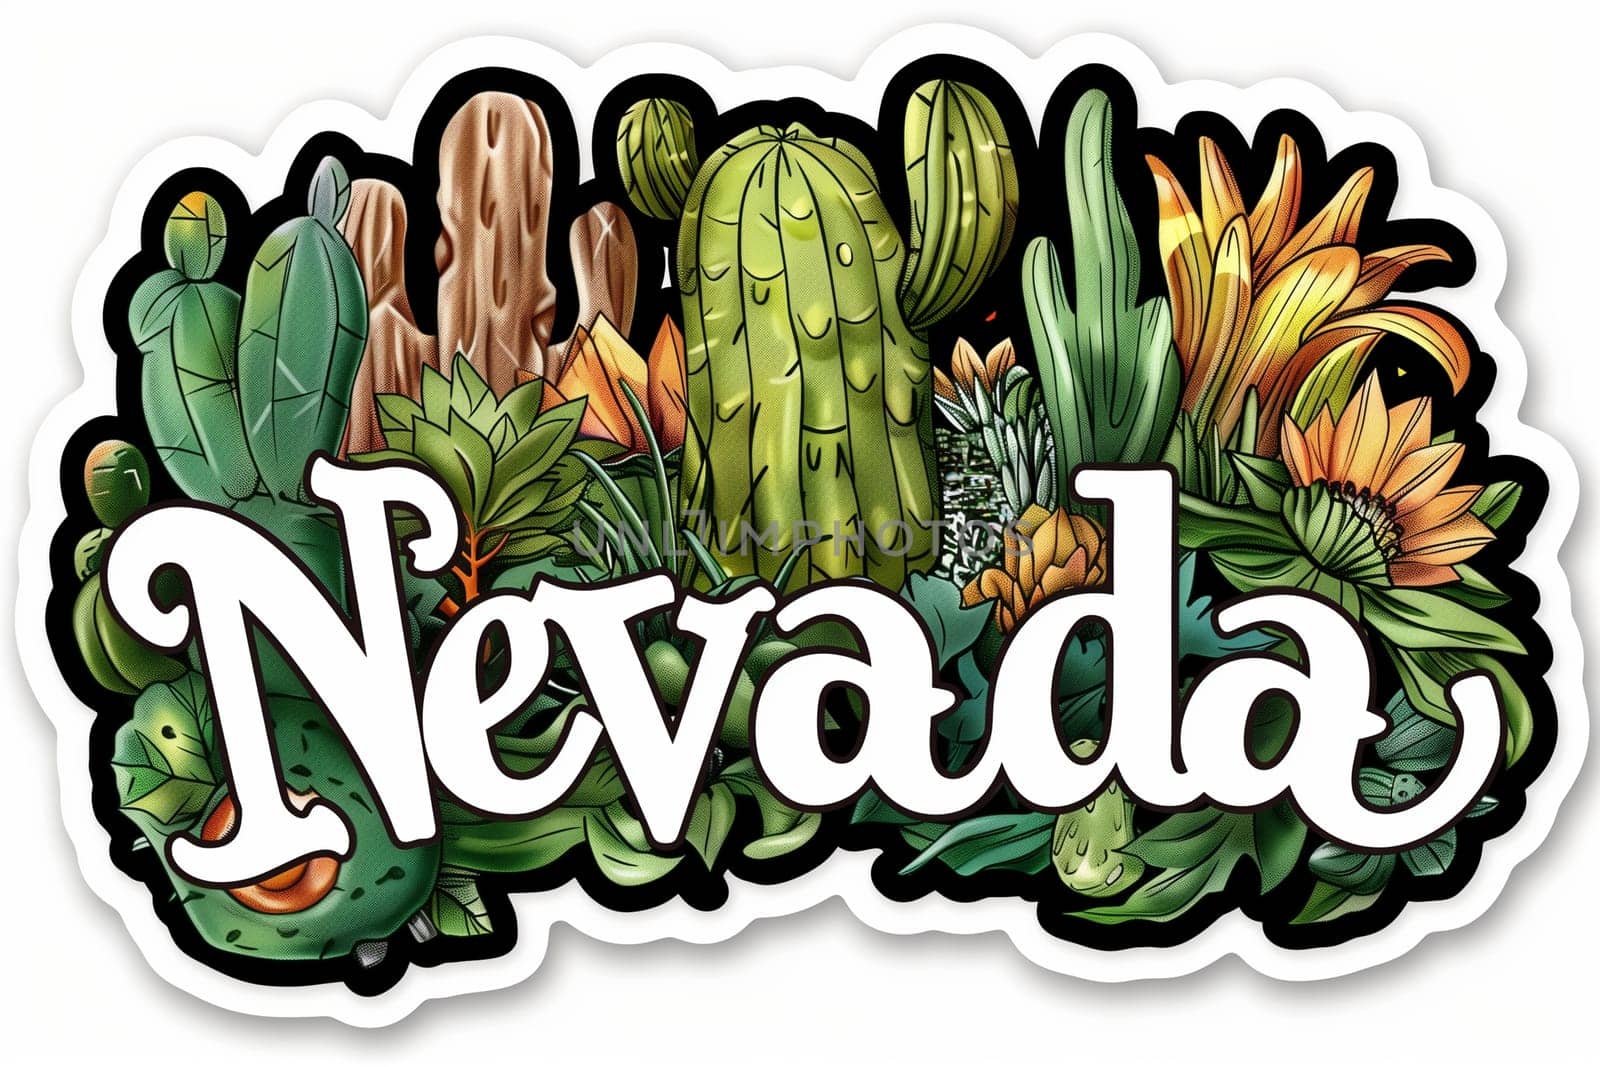 Nevada Sticker Surrounded by Cacti by Sd28DimoN_1976